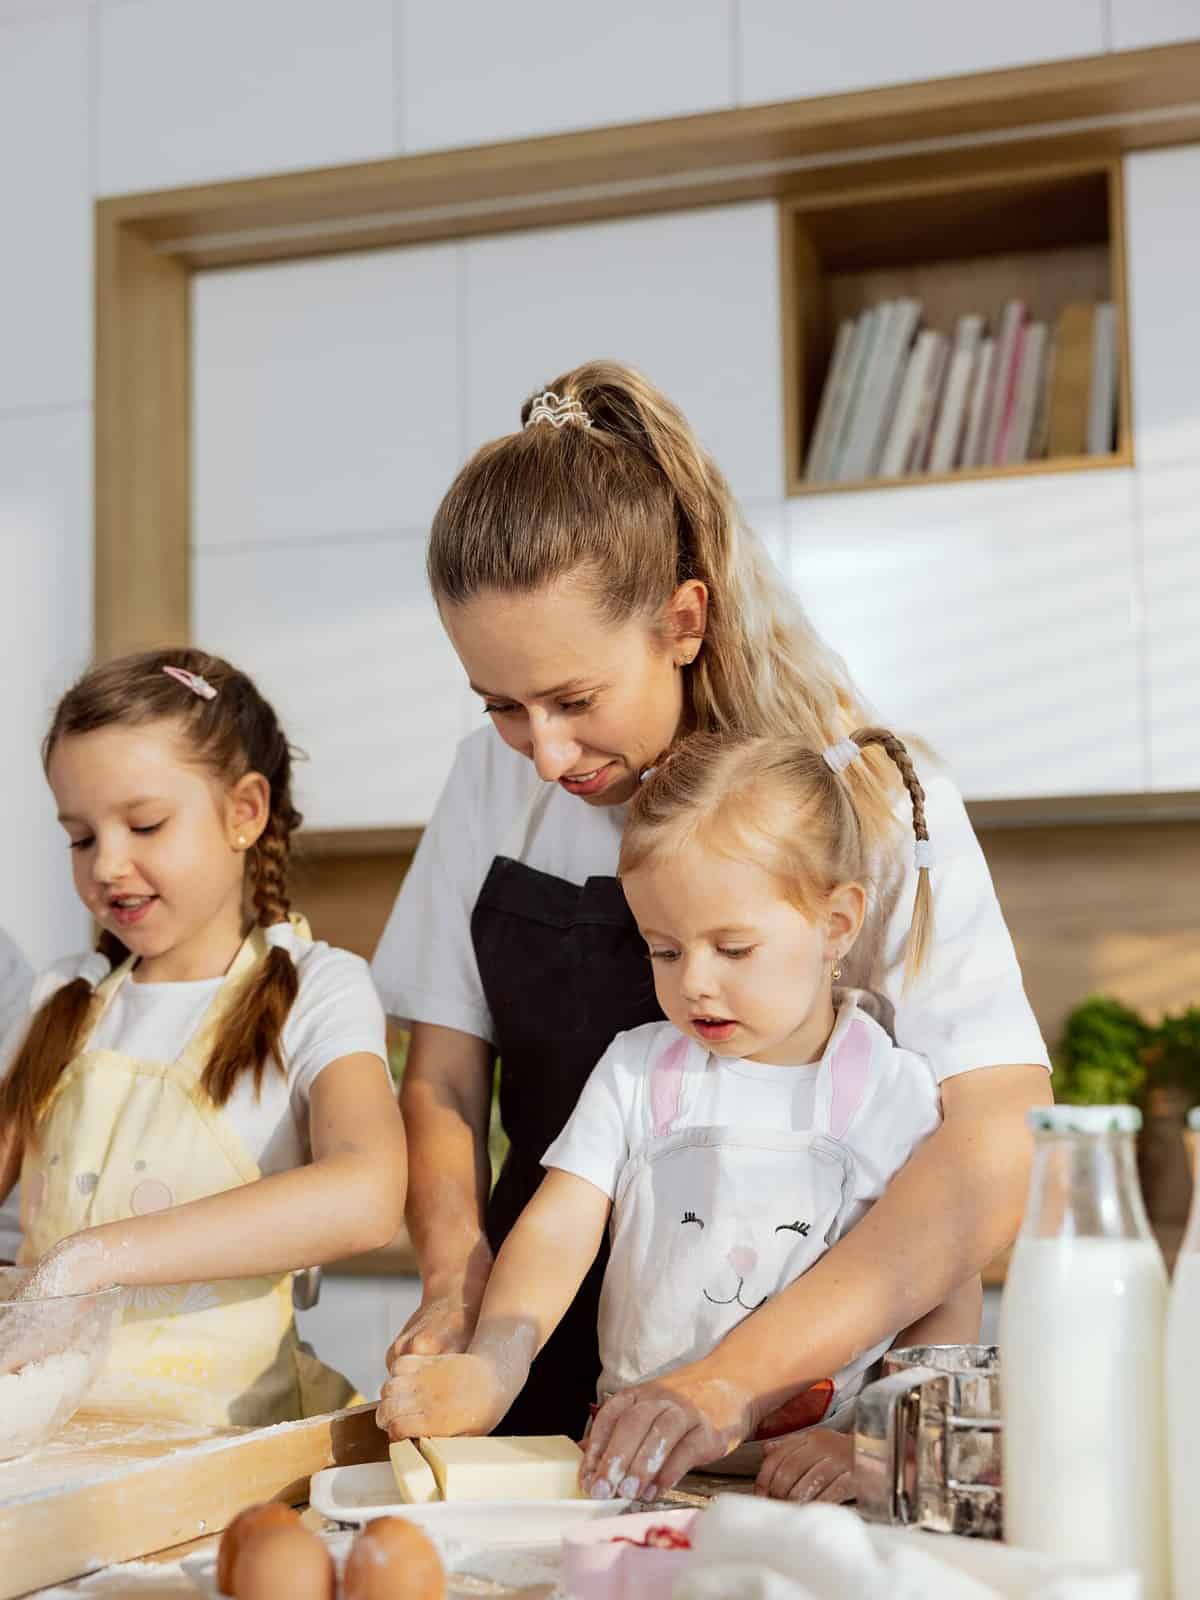 Salted vs Unsalted Butter: Excited preschooler daughter with young mother cutting butter with knife together in modern kitchen. Older kid kneading dough mixing eggs and flour. Family preparing dough for domestic pizza.